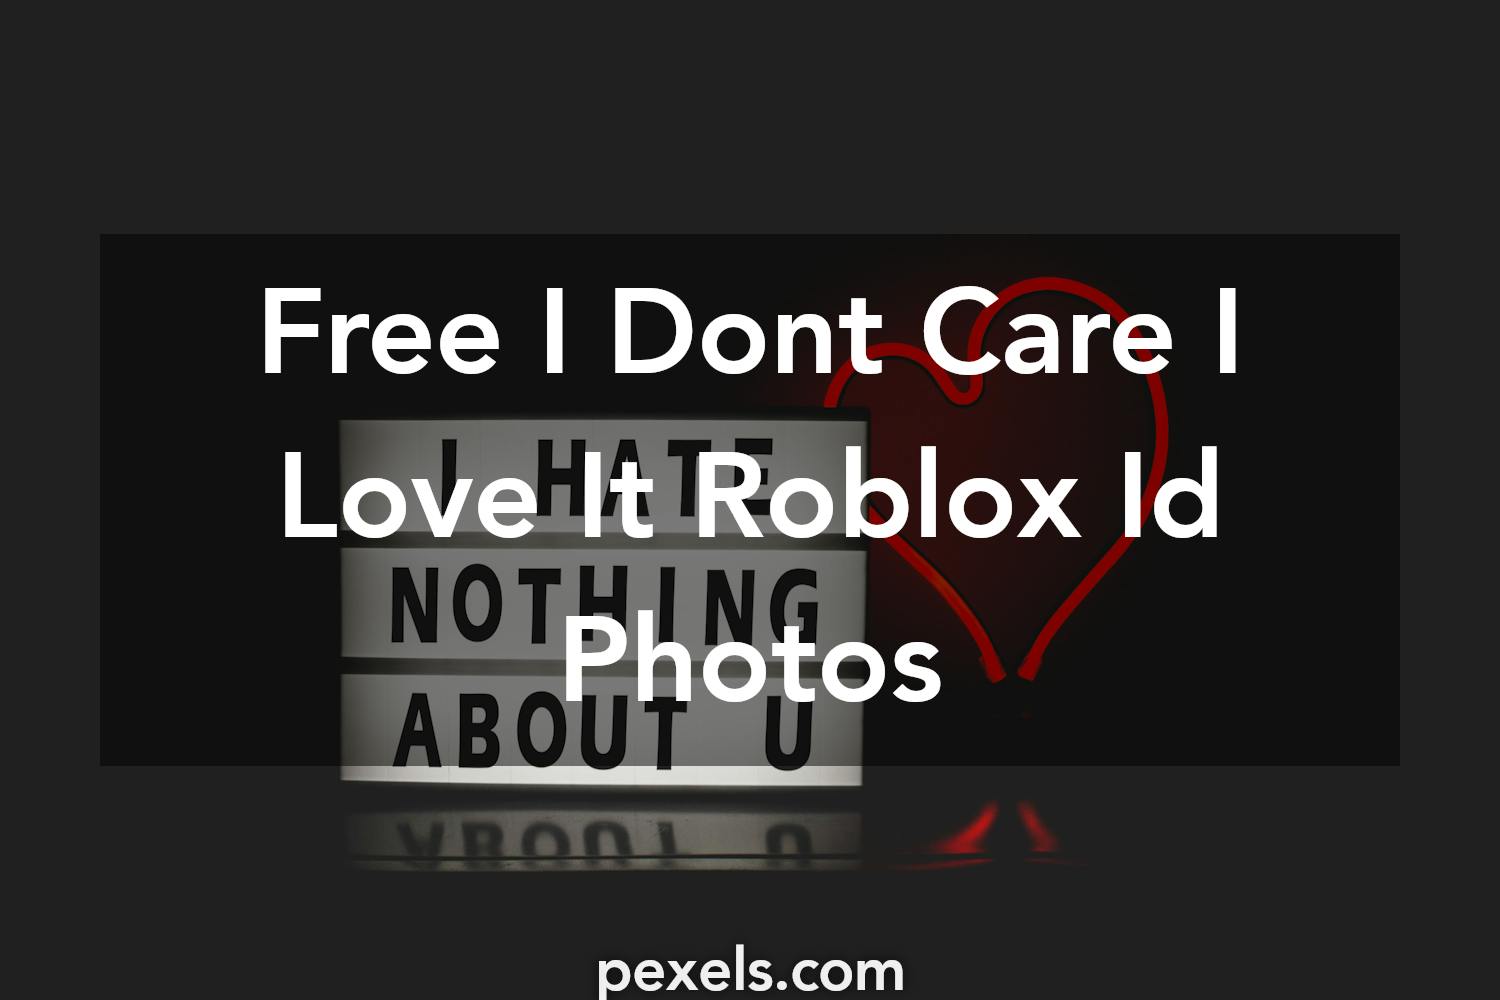 1000 Roblox Ids - dollhouse music code roblox how to get one more robux